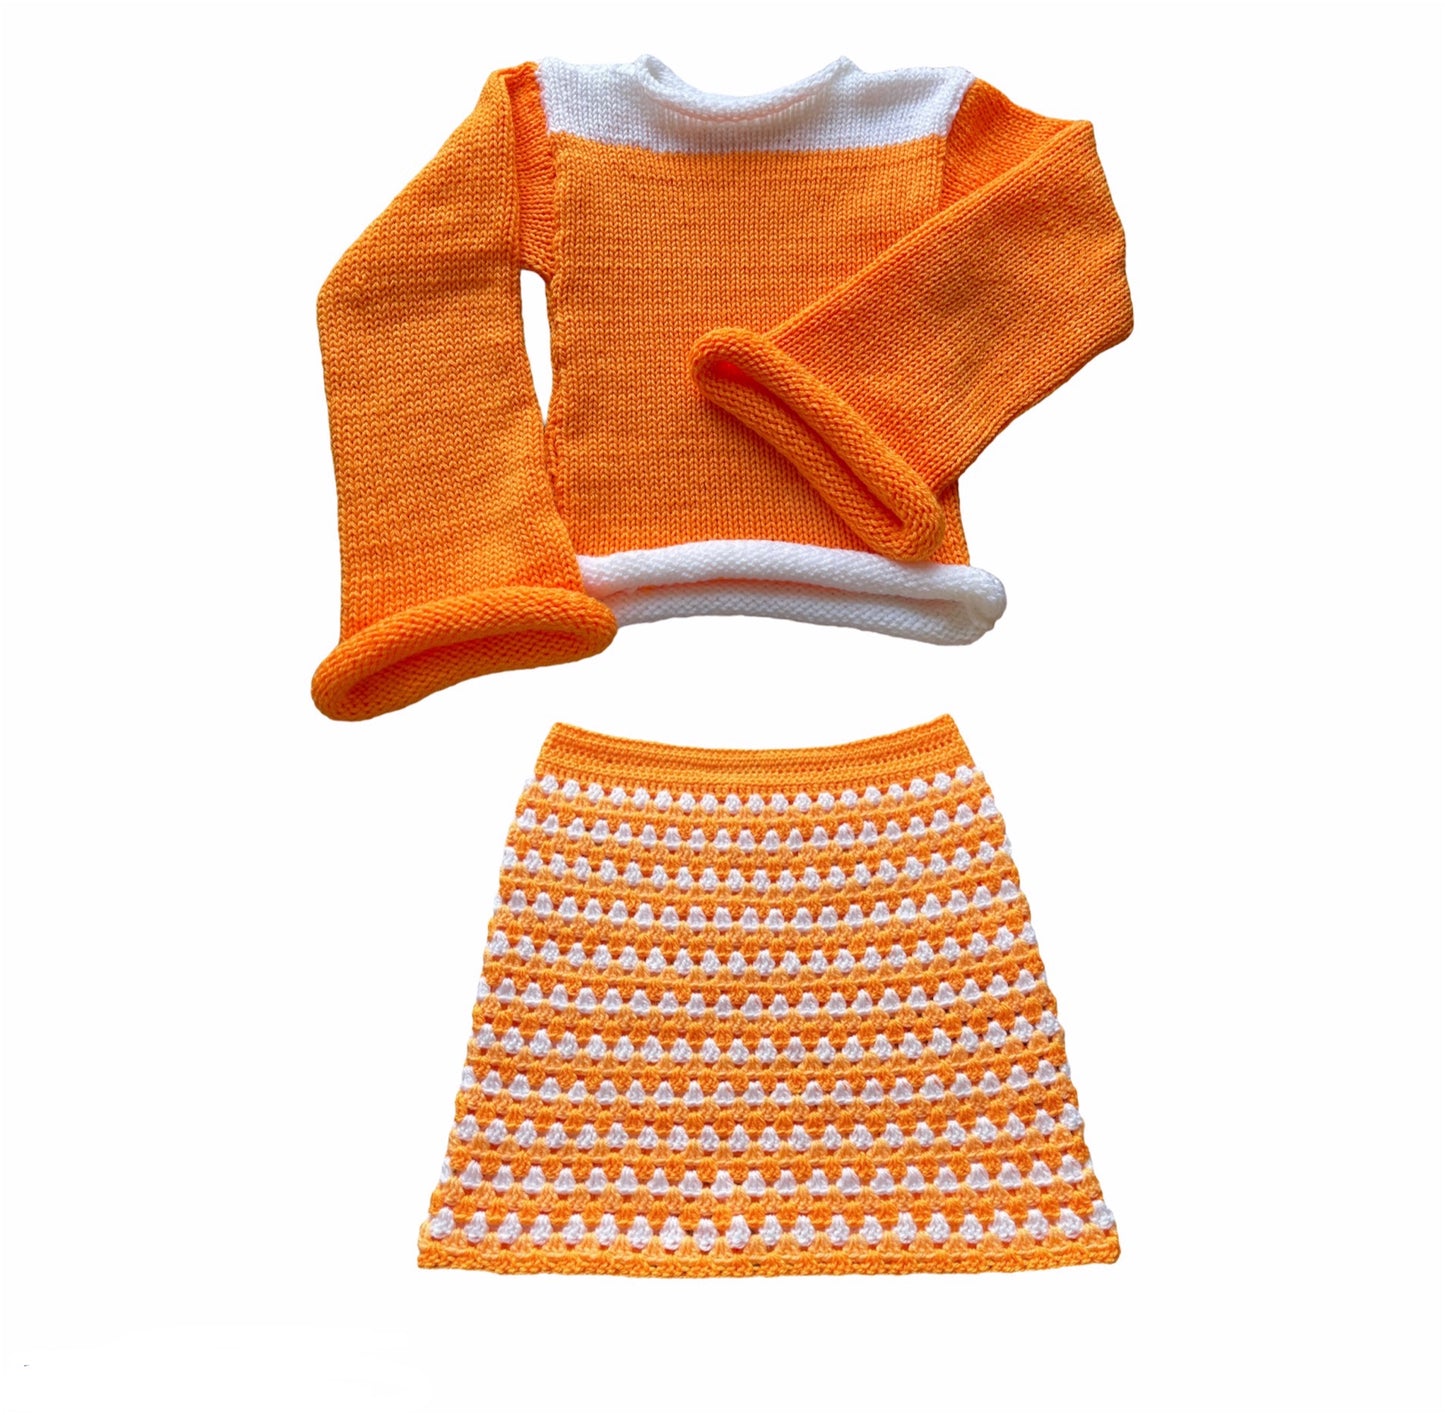 Handmade knitted colour block jumper in orange and white